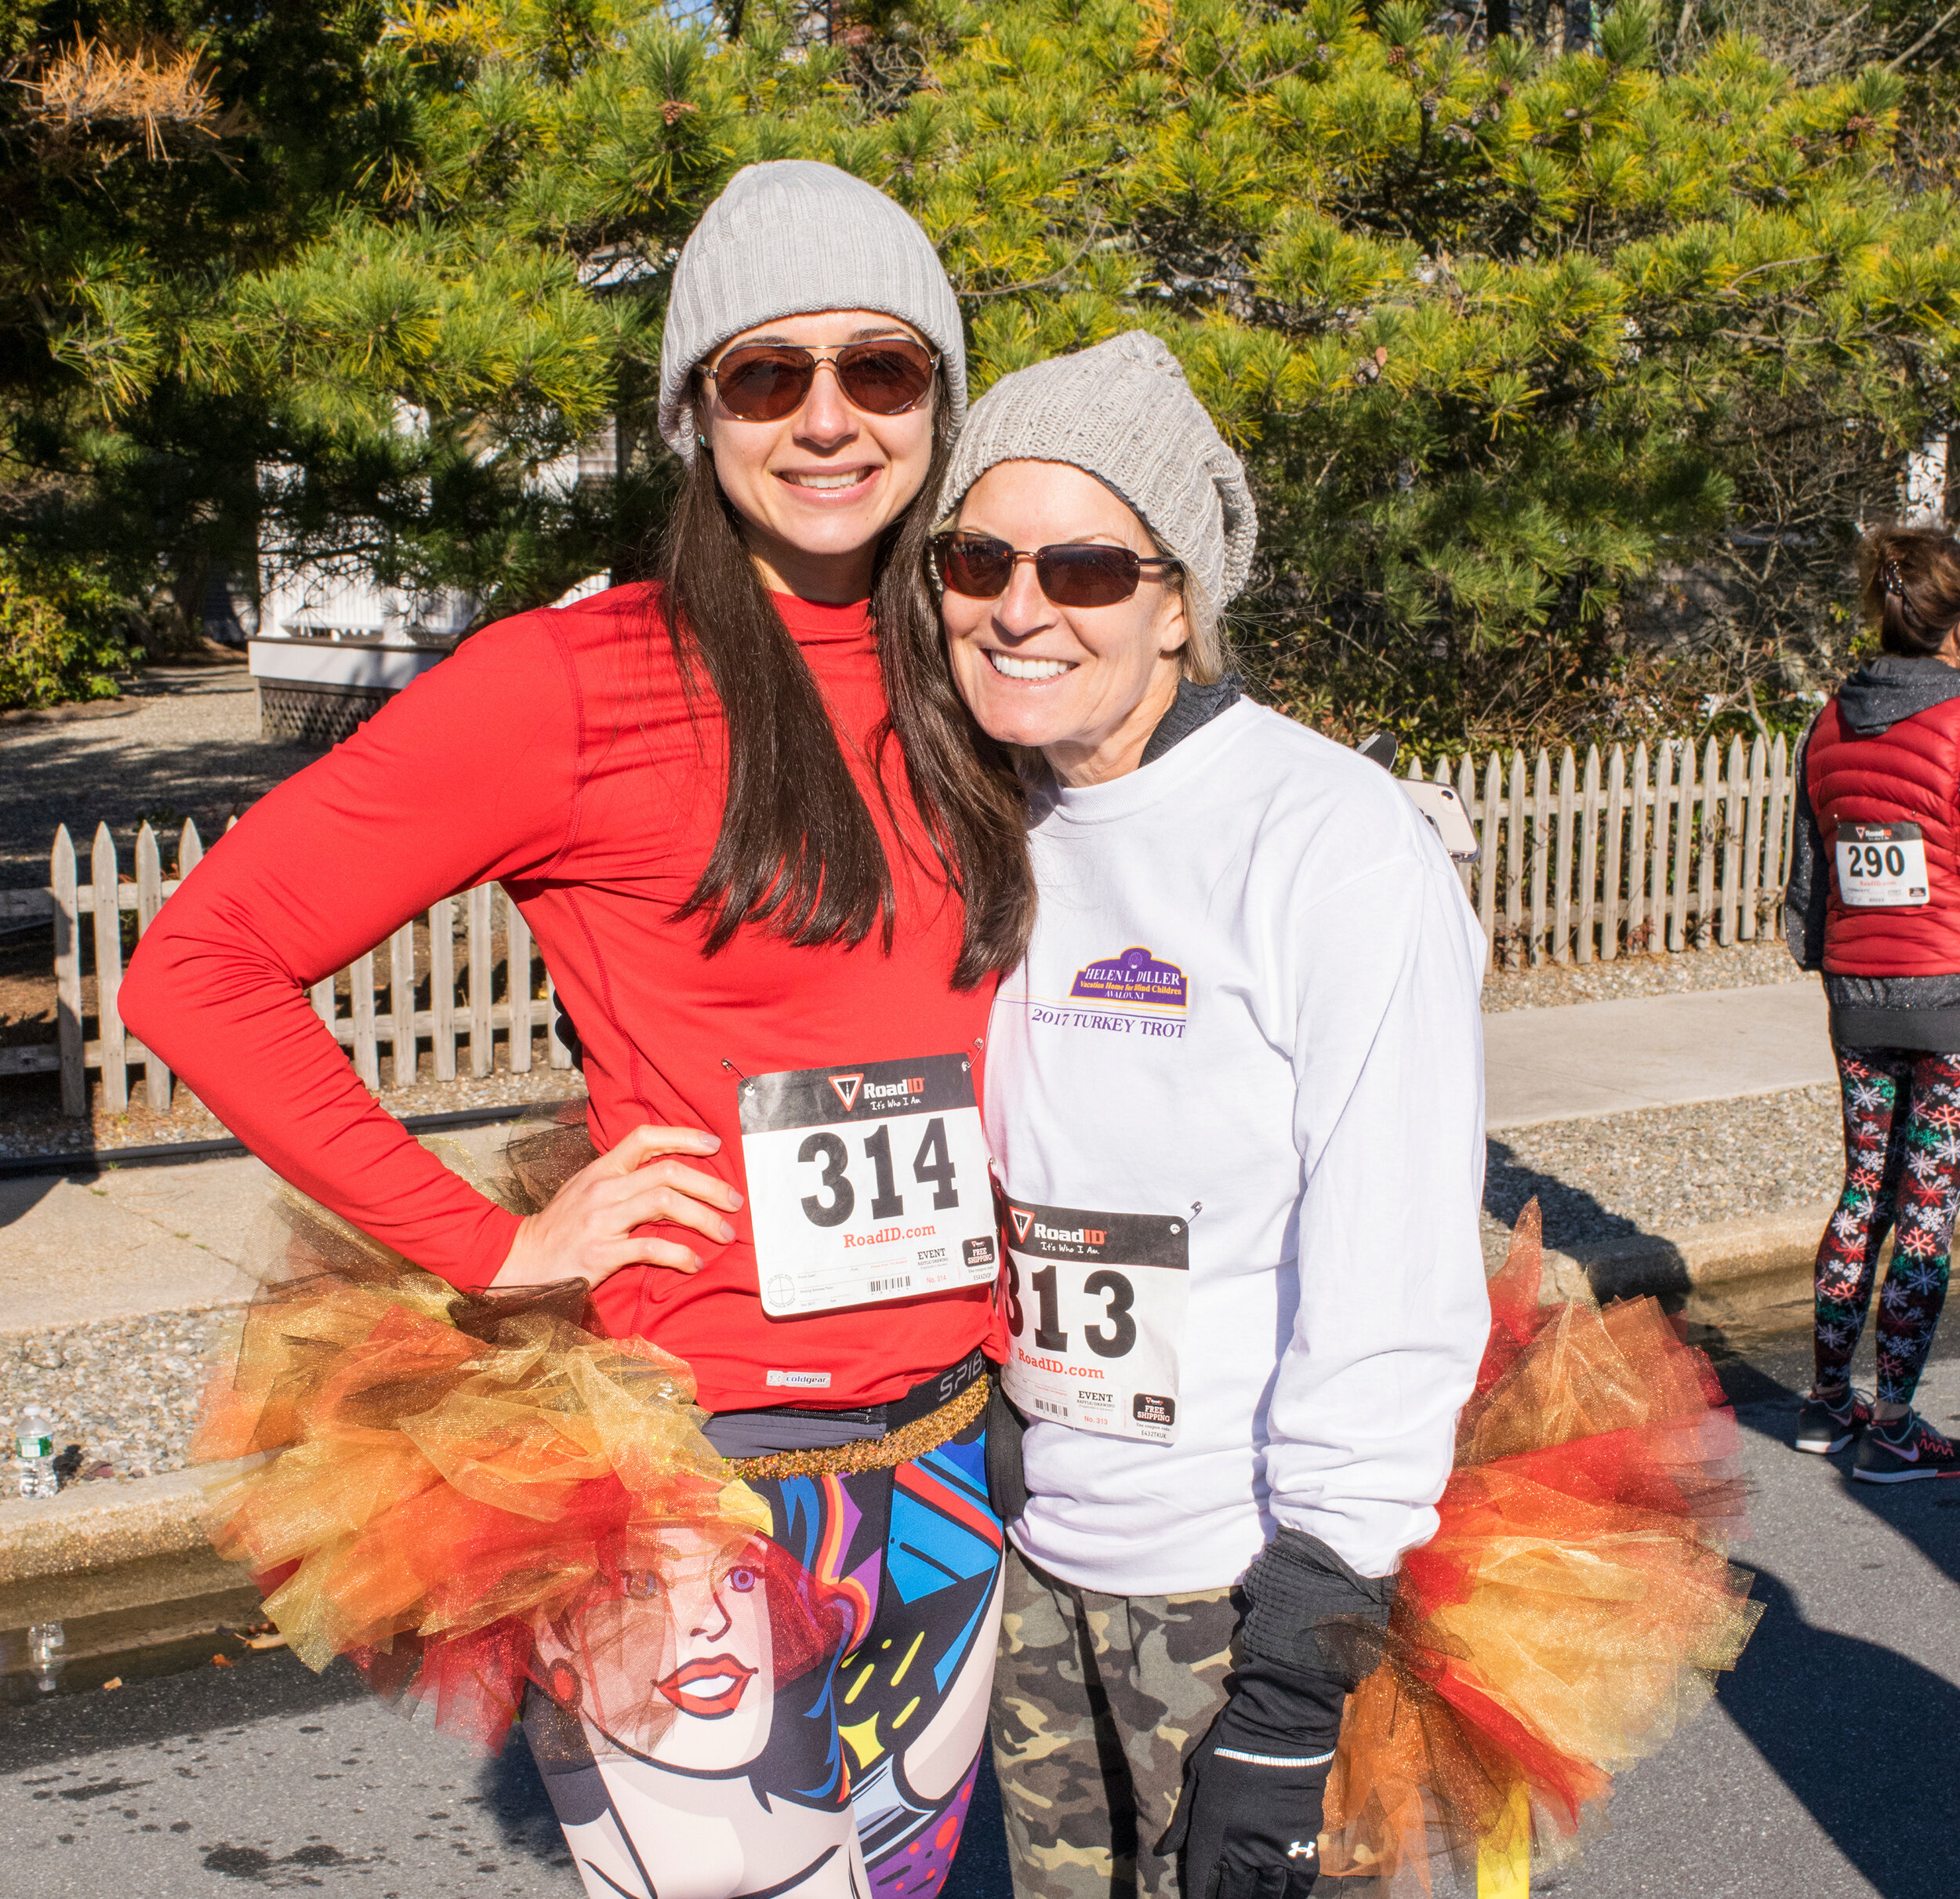 Vanessa Forero and Erica Gioffre participated in the 2017 Turkey Trot.